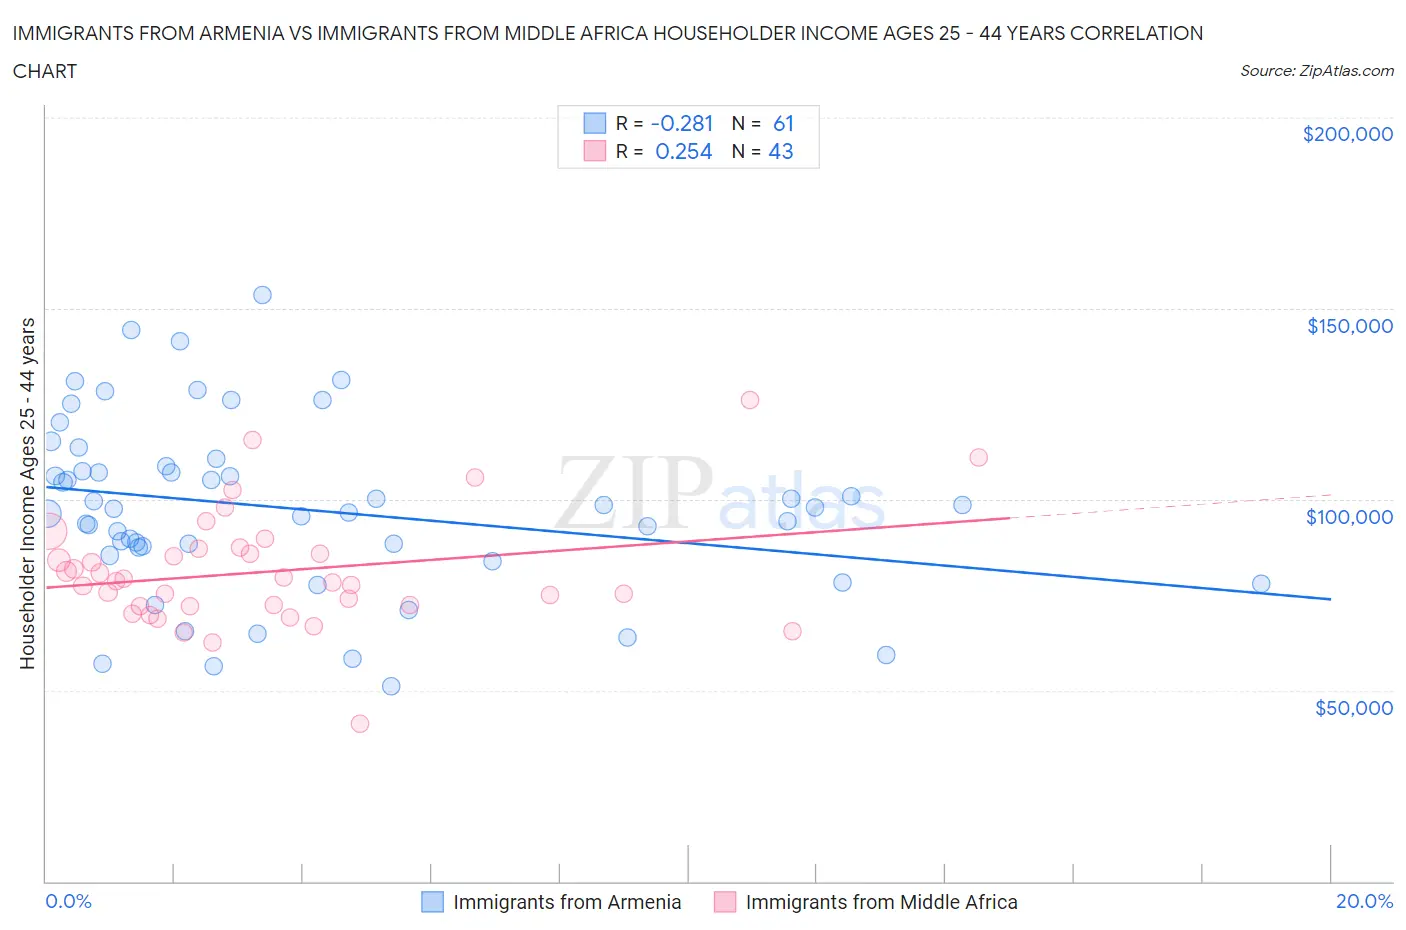 Immigrants from Armenia vs Immigrants from Middle Africa Householder Income Ages 25 - 44 years